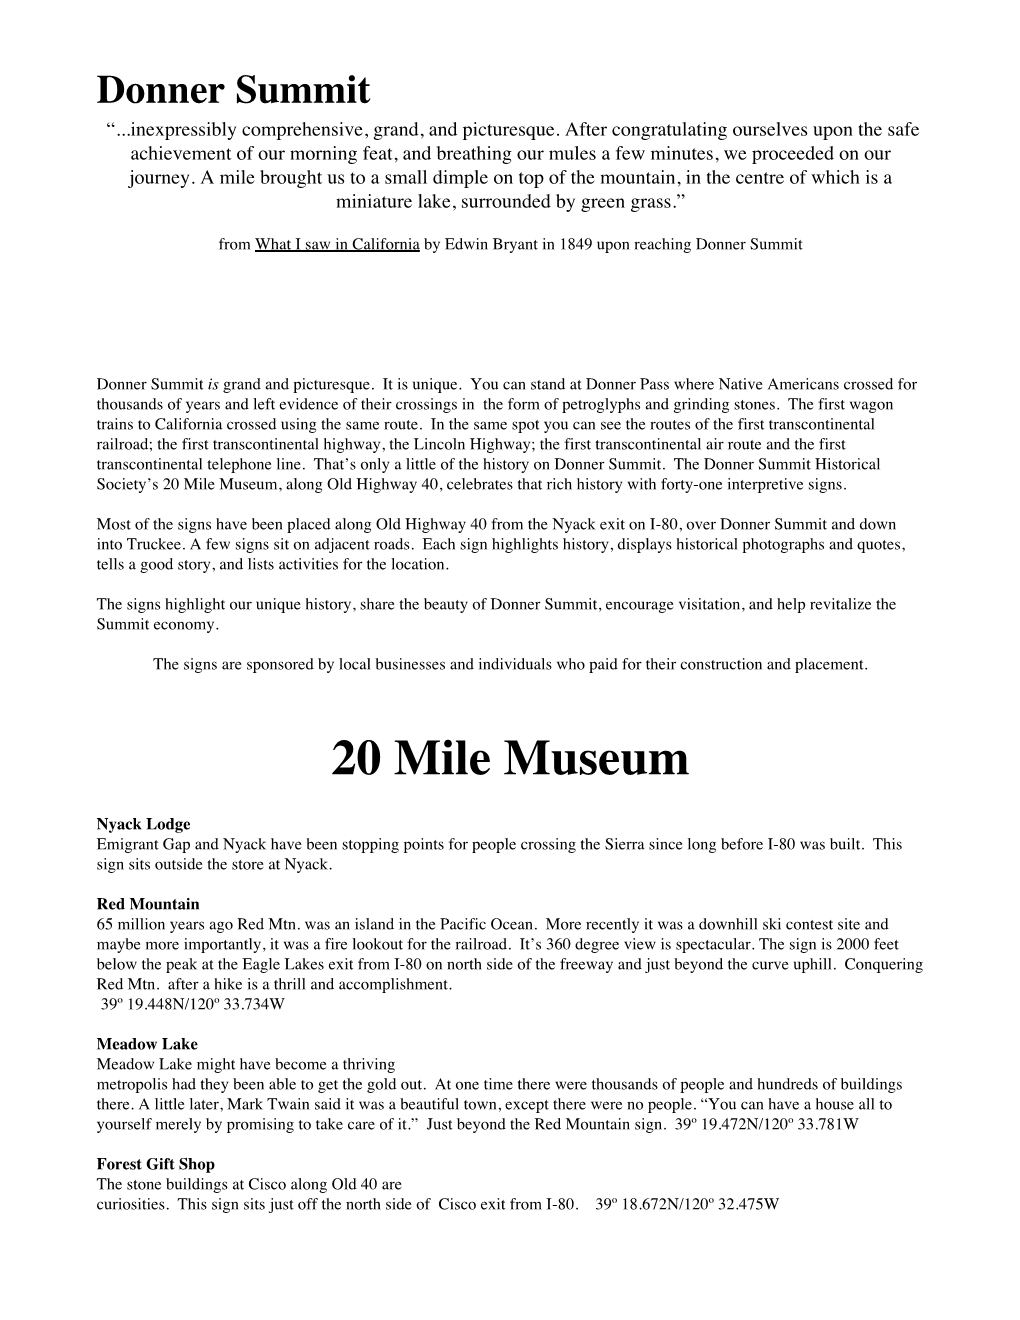 20 Mile Museum, Along Old Highway 40, Celebrates That Rich History with Forty-One Interpretive Signs